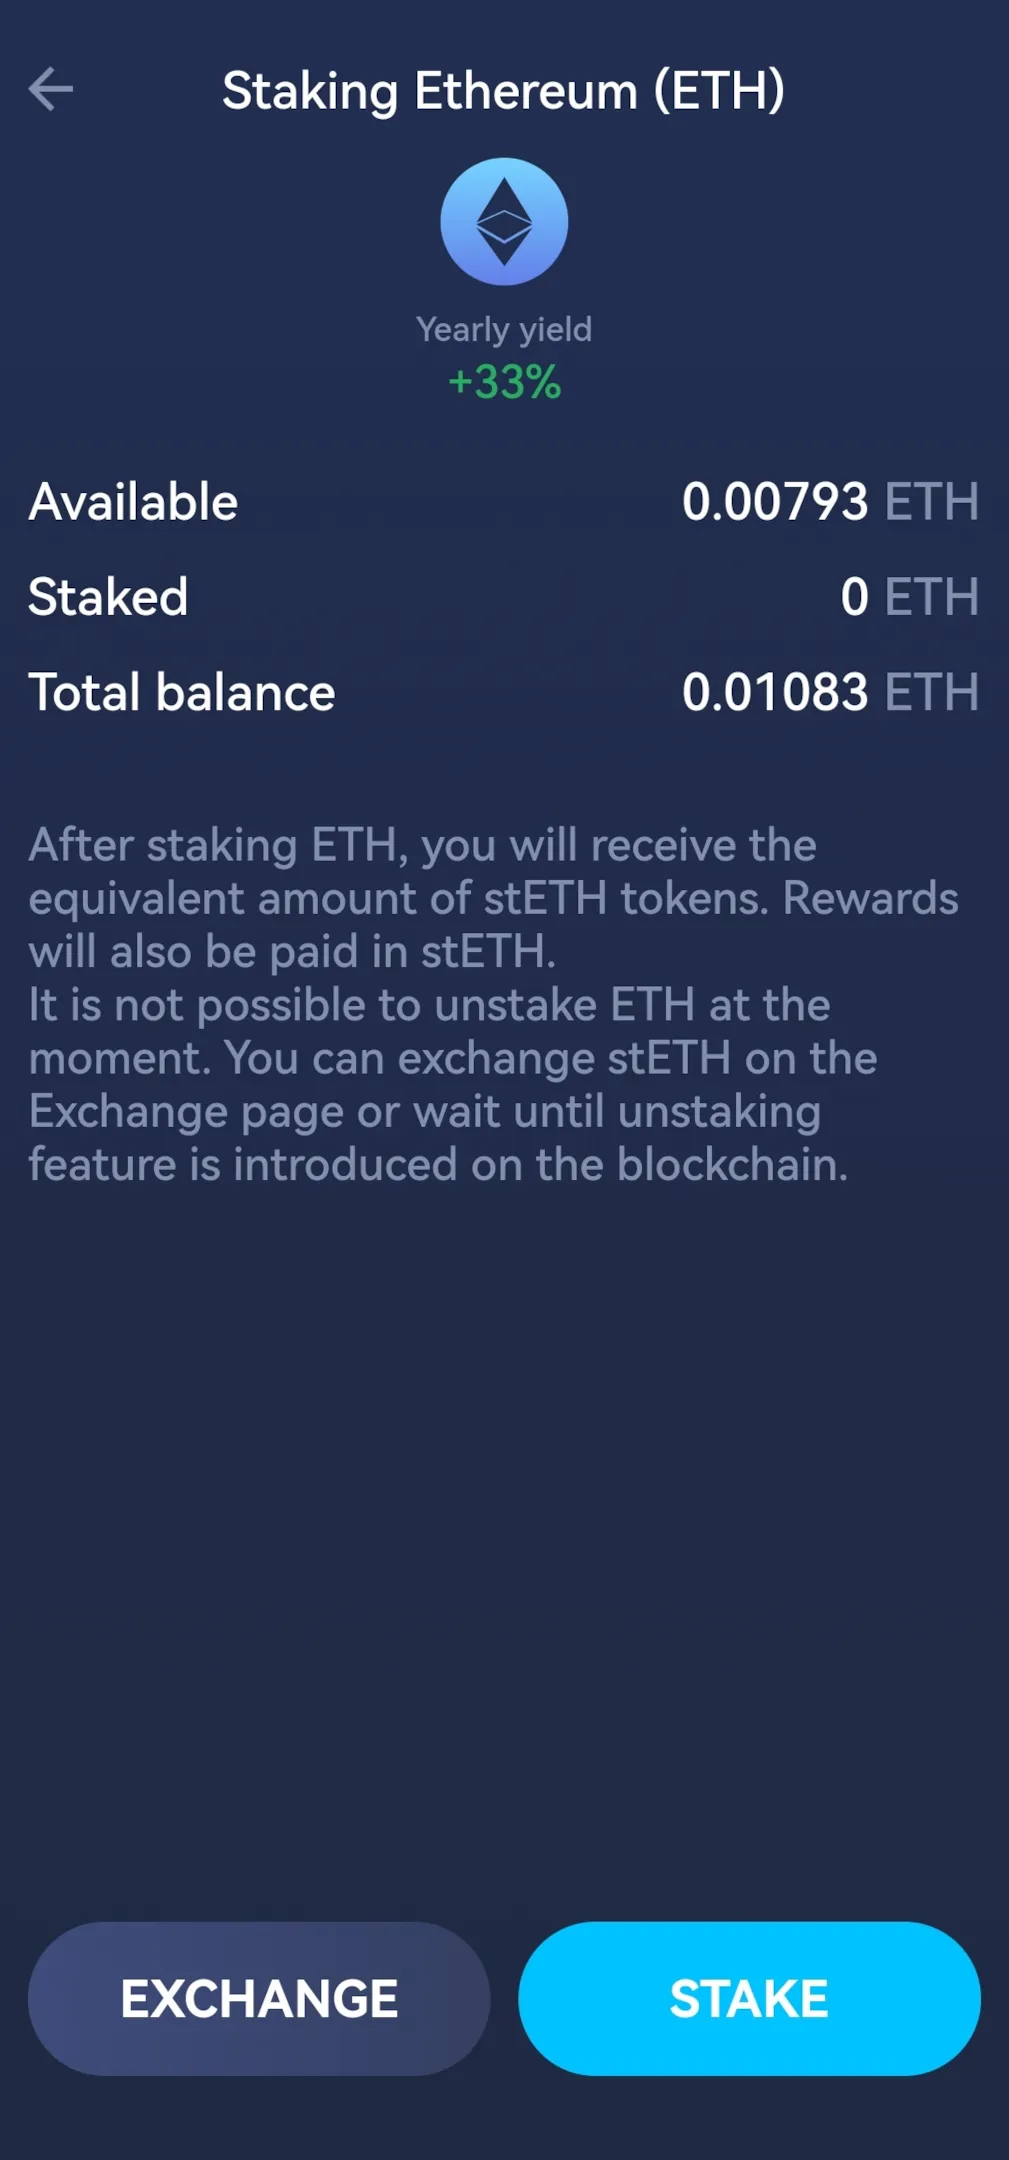 ETH staking interface in the mobile version of Atomic Wallet